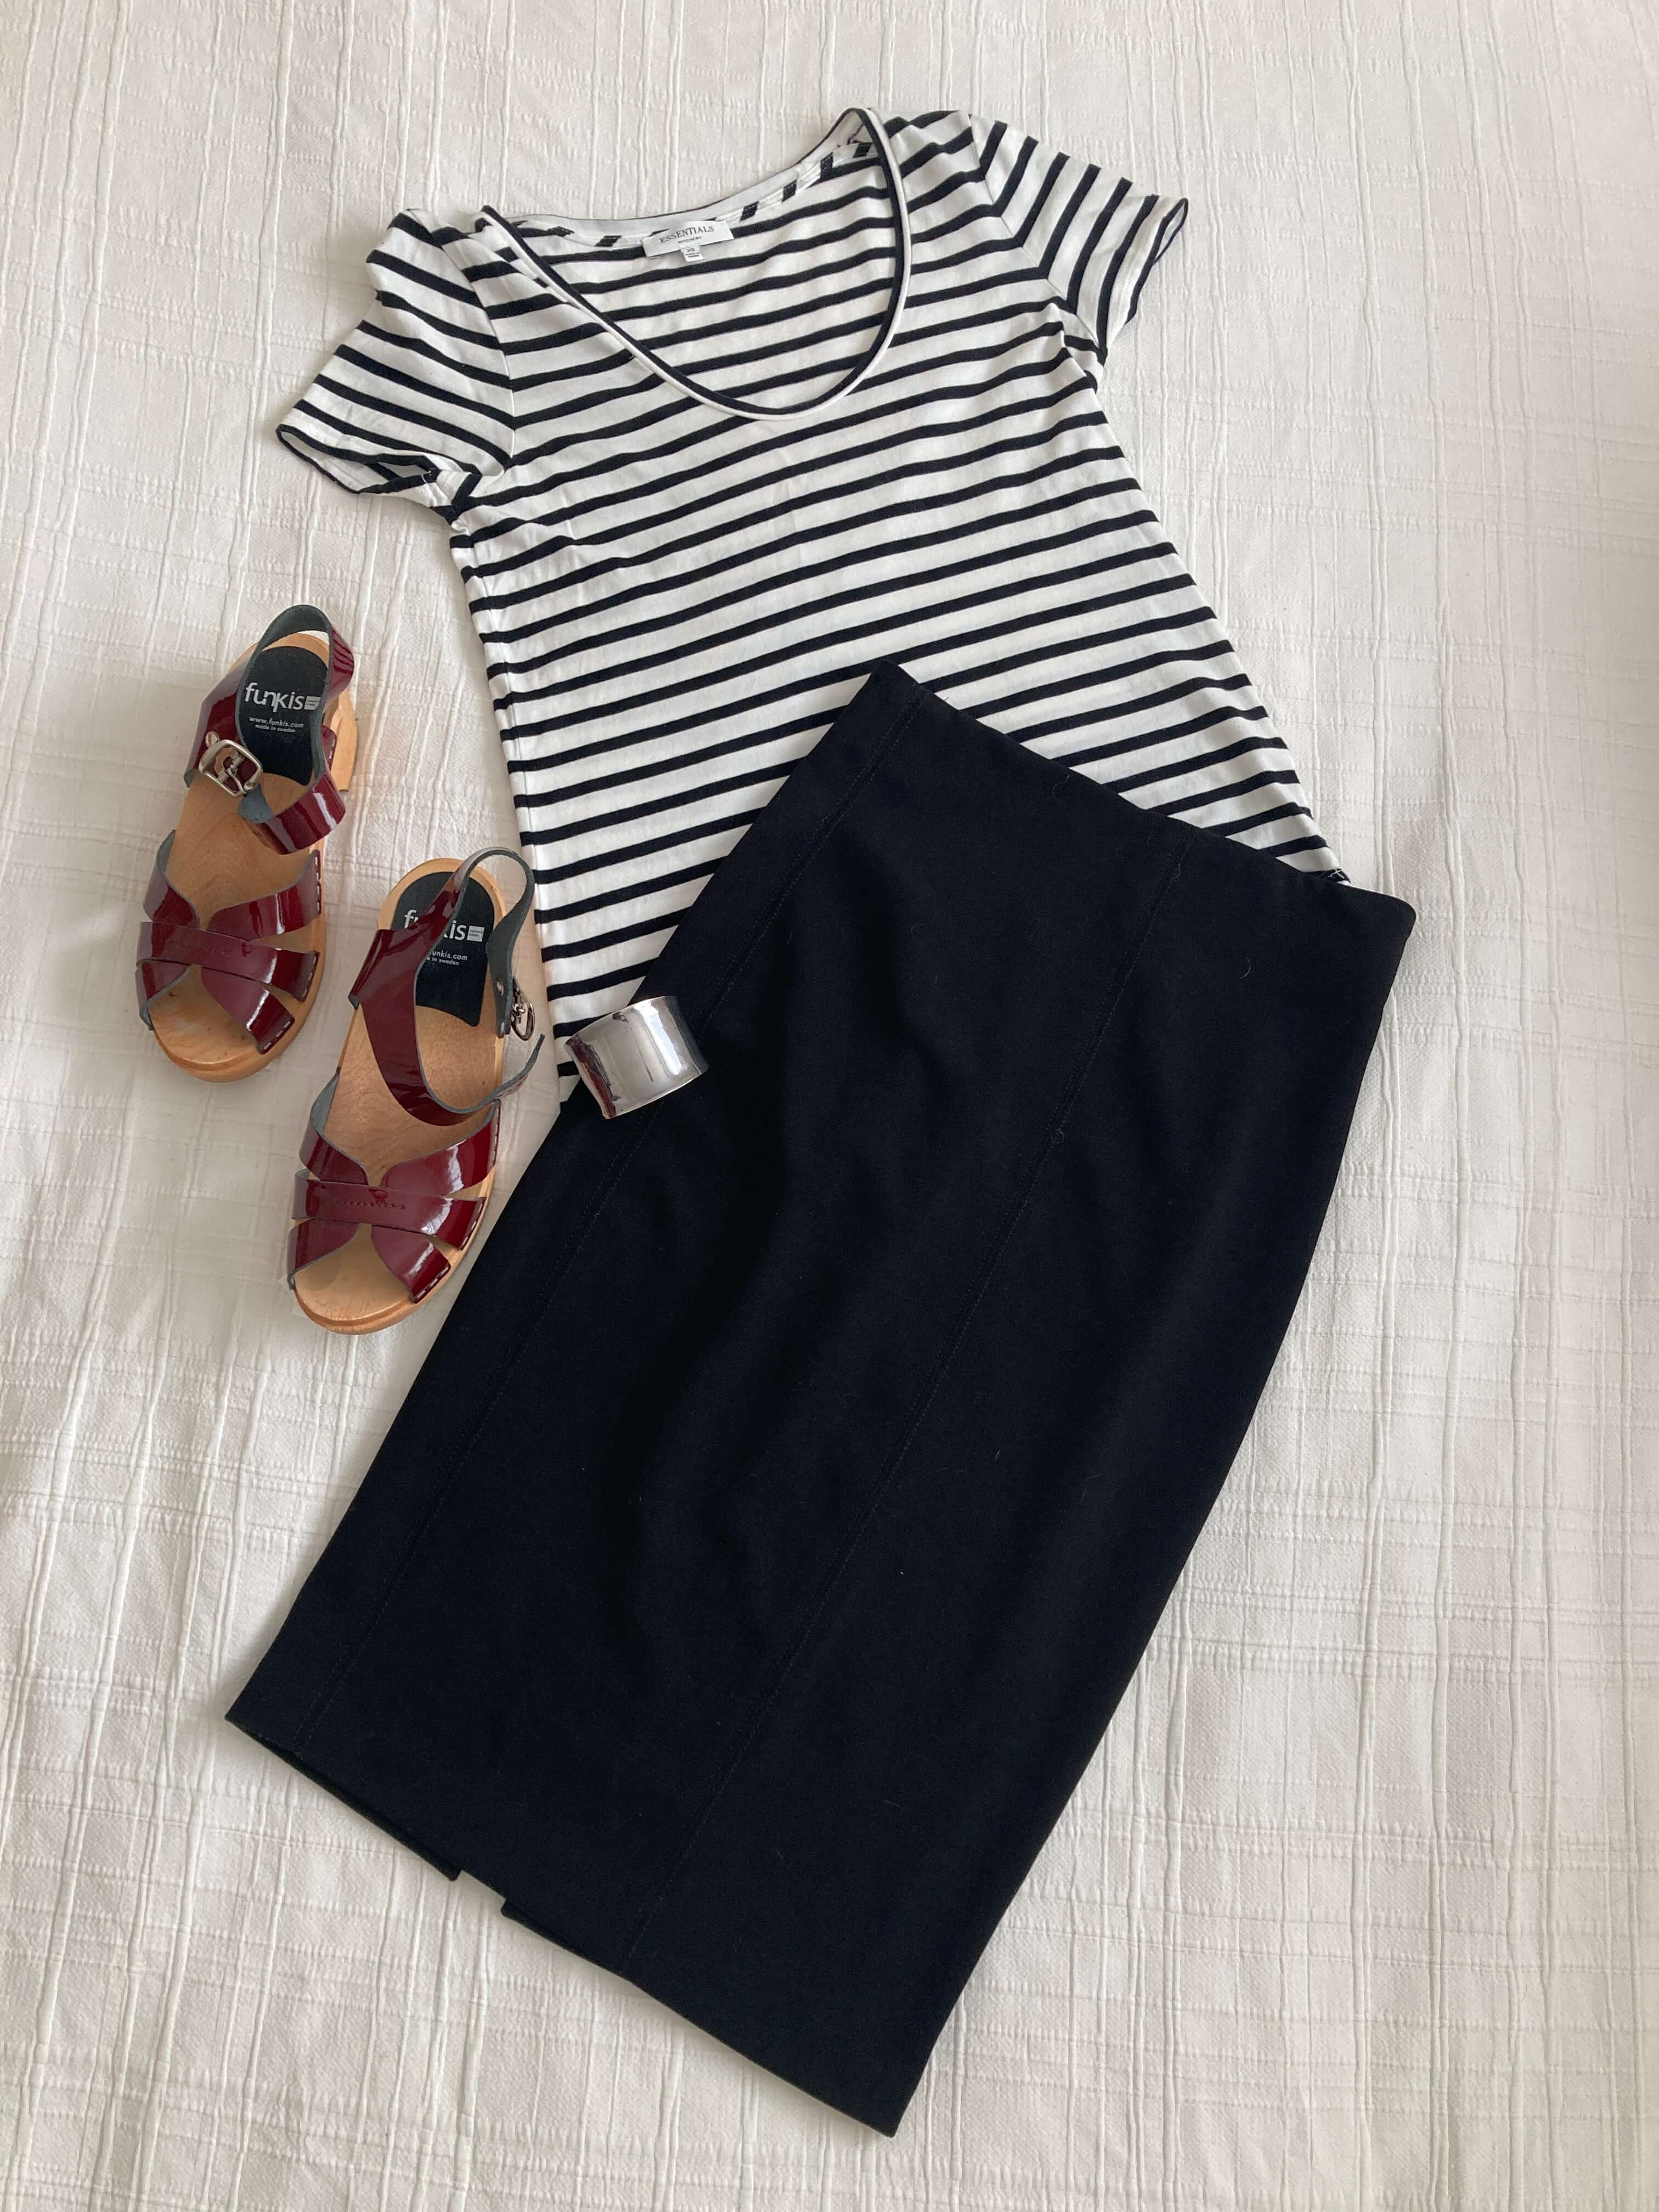 clack and white t-shirt with burgundy clogs for style tips